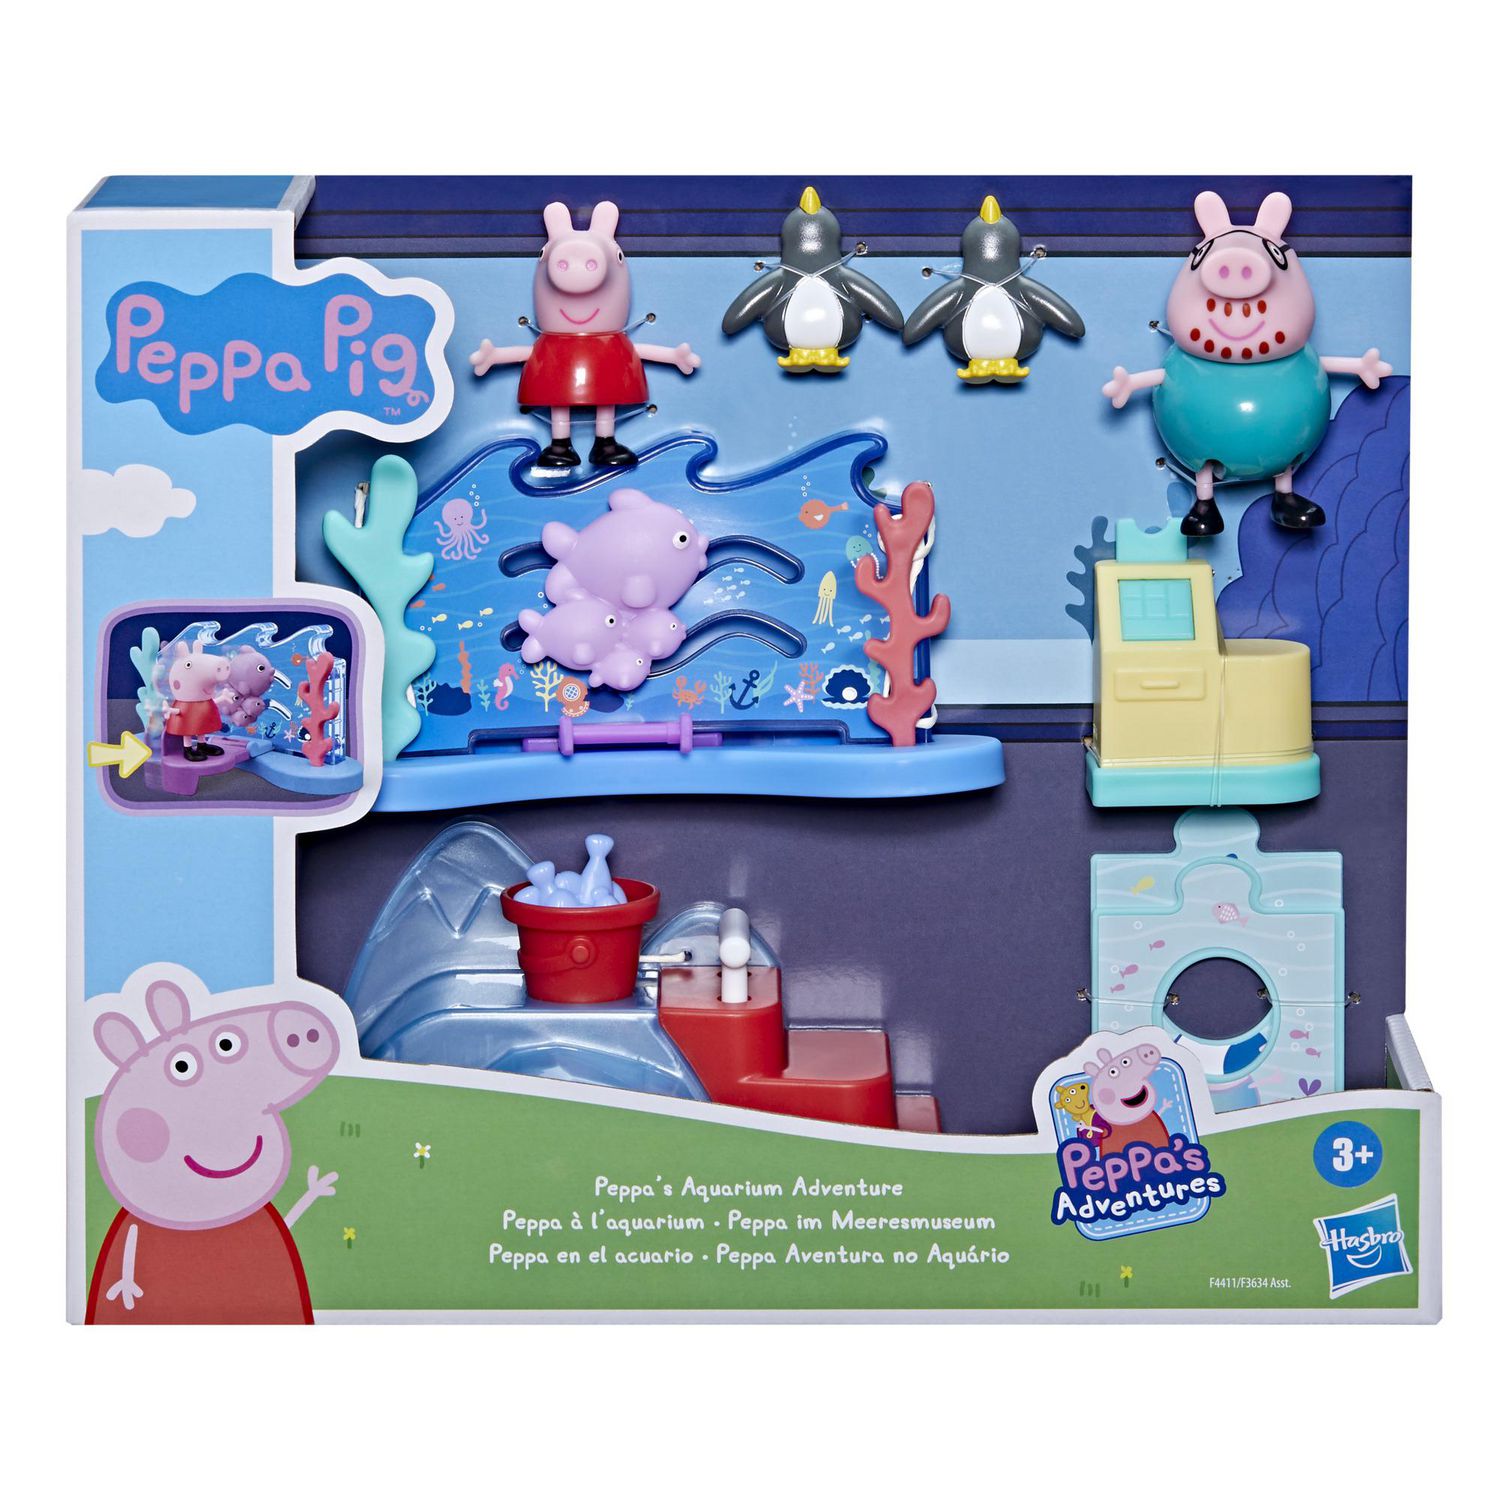 Peppa Pig ＆ Friends Sweet Day Ice Cream Toy Playset, 13 Pieces